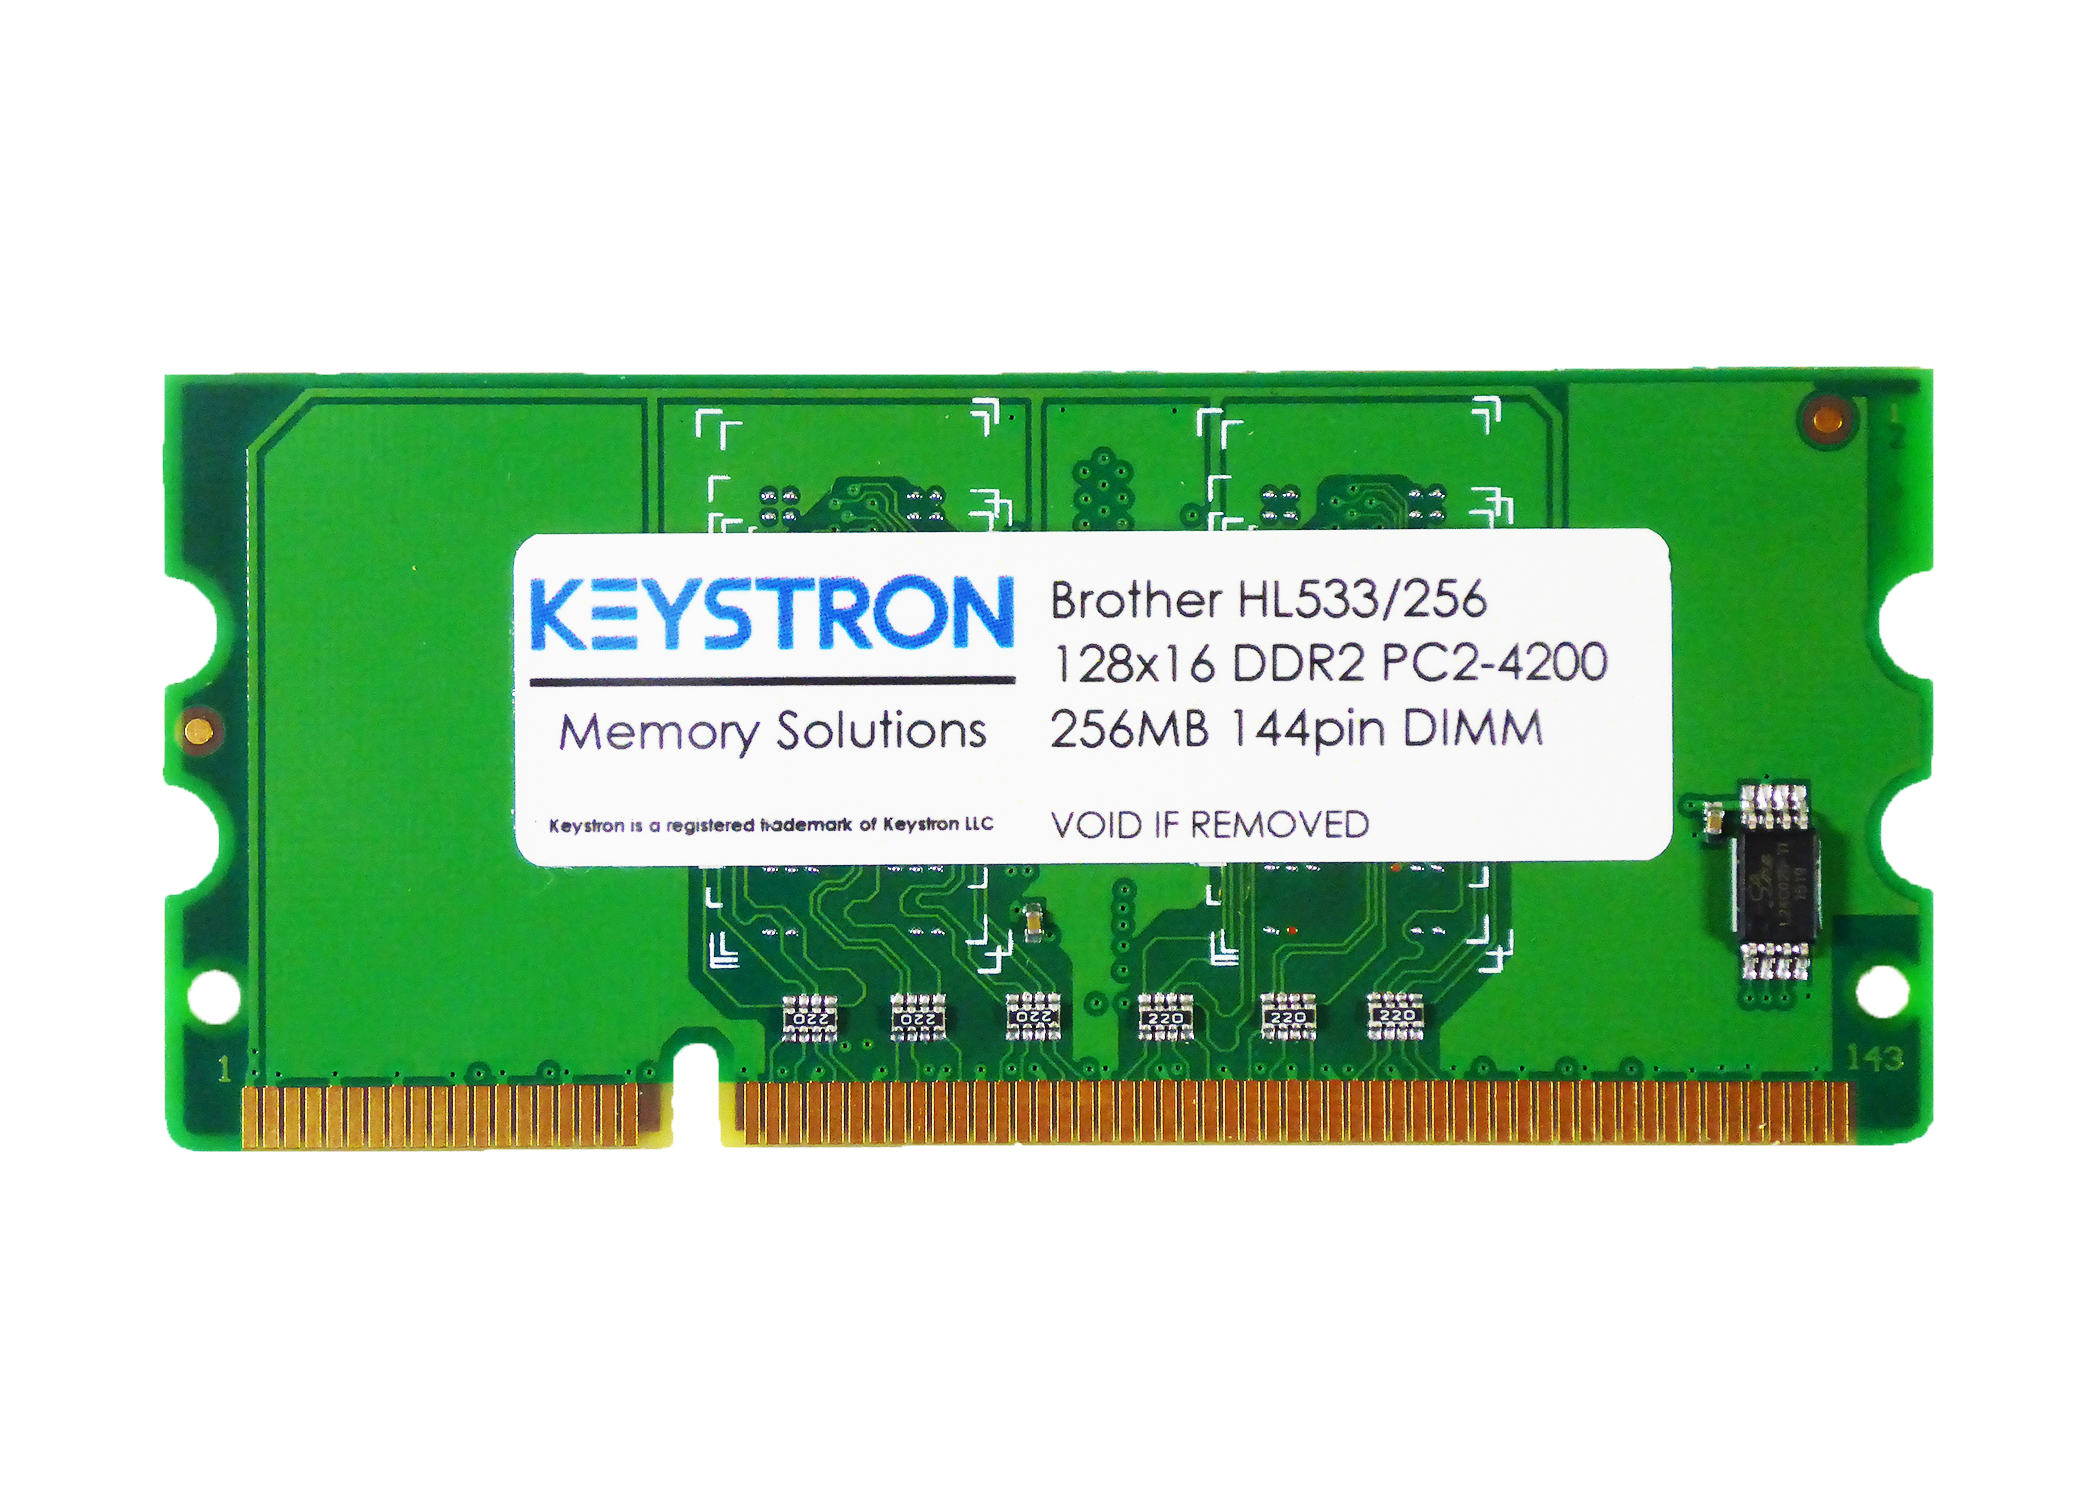 256MB DDR2 144pin 16-bit Memory Upgrade for Brother Laser Printer DCP-8110DN, DCP-8150DN, DCP-8155DN - image 2 of 2